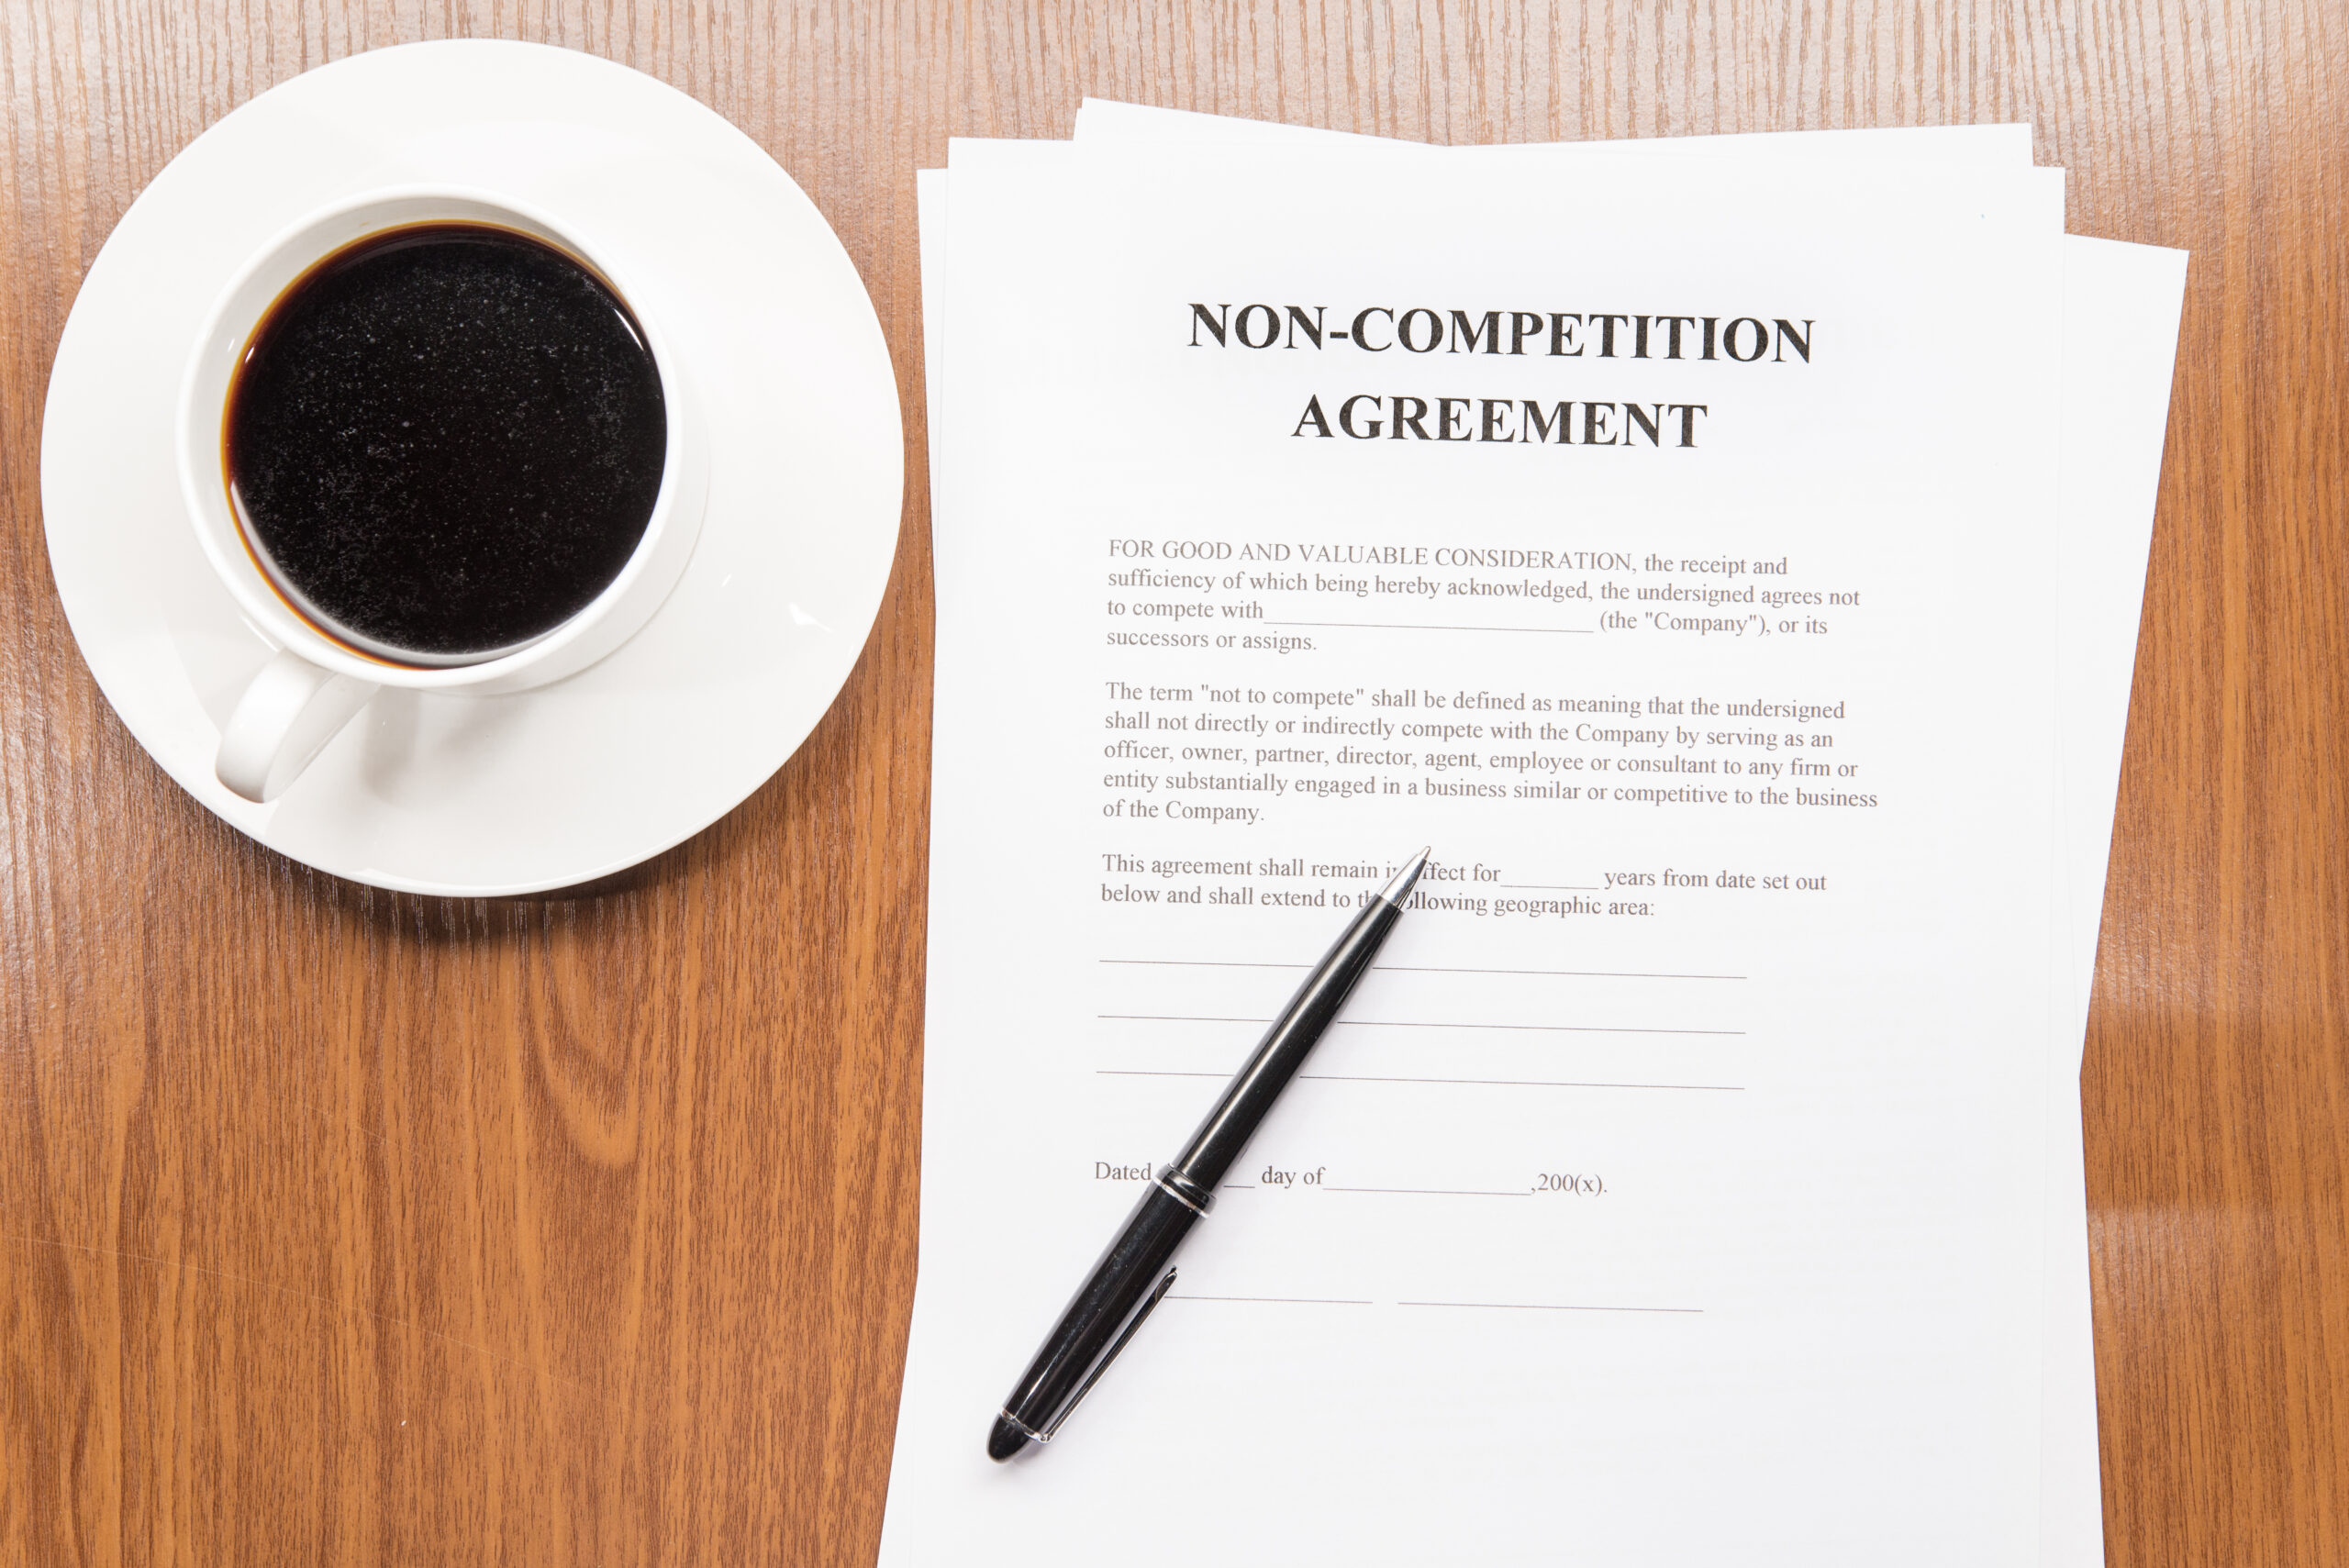 Reviewing SC Non-Compete and Non-Solicit Agreements